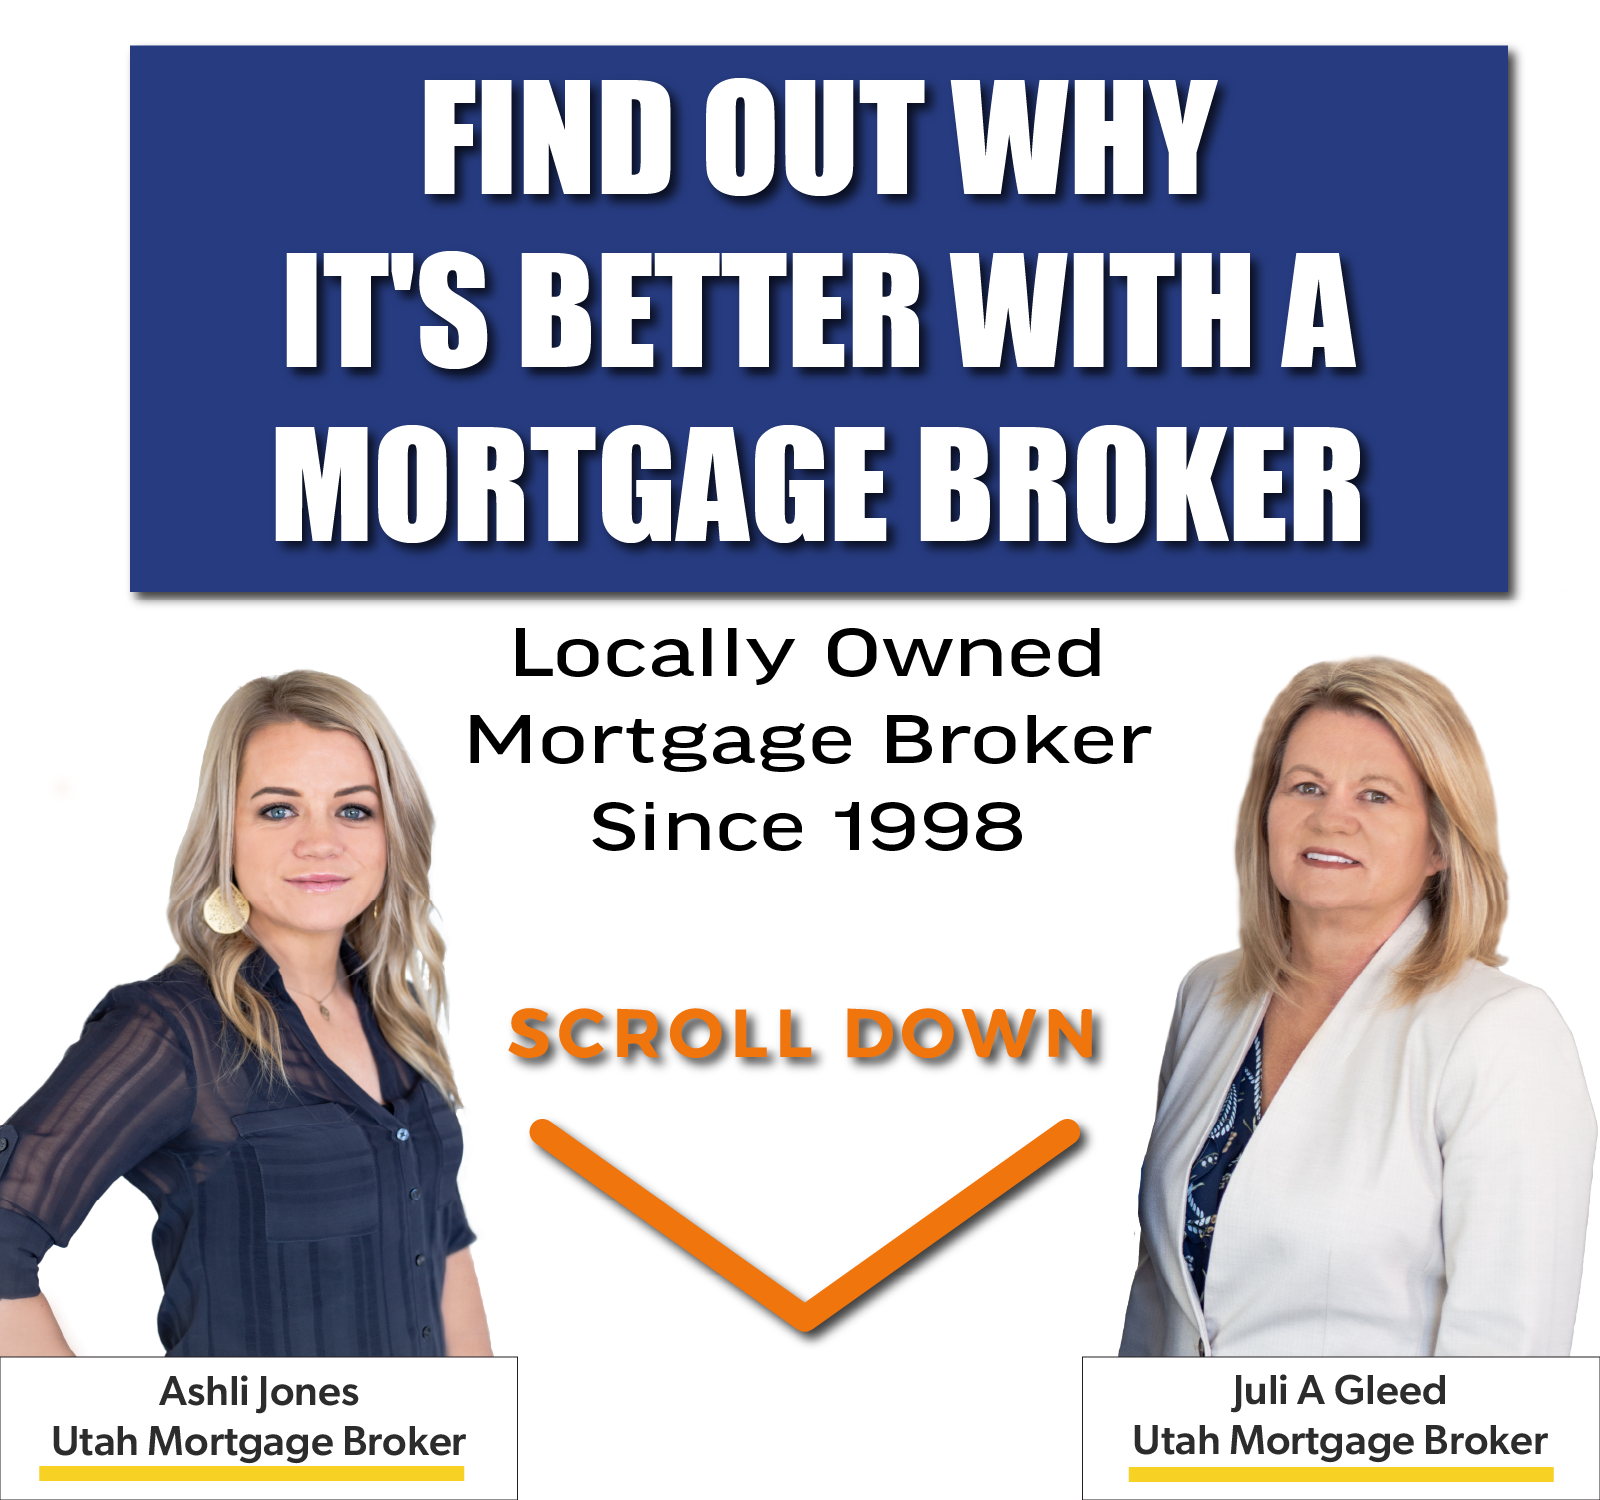 Find Out Why It's Better with a Mortgage Broker